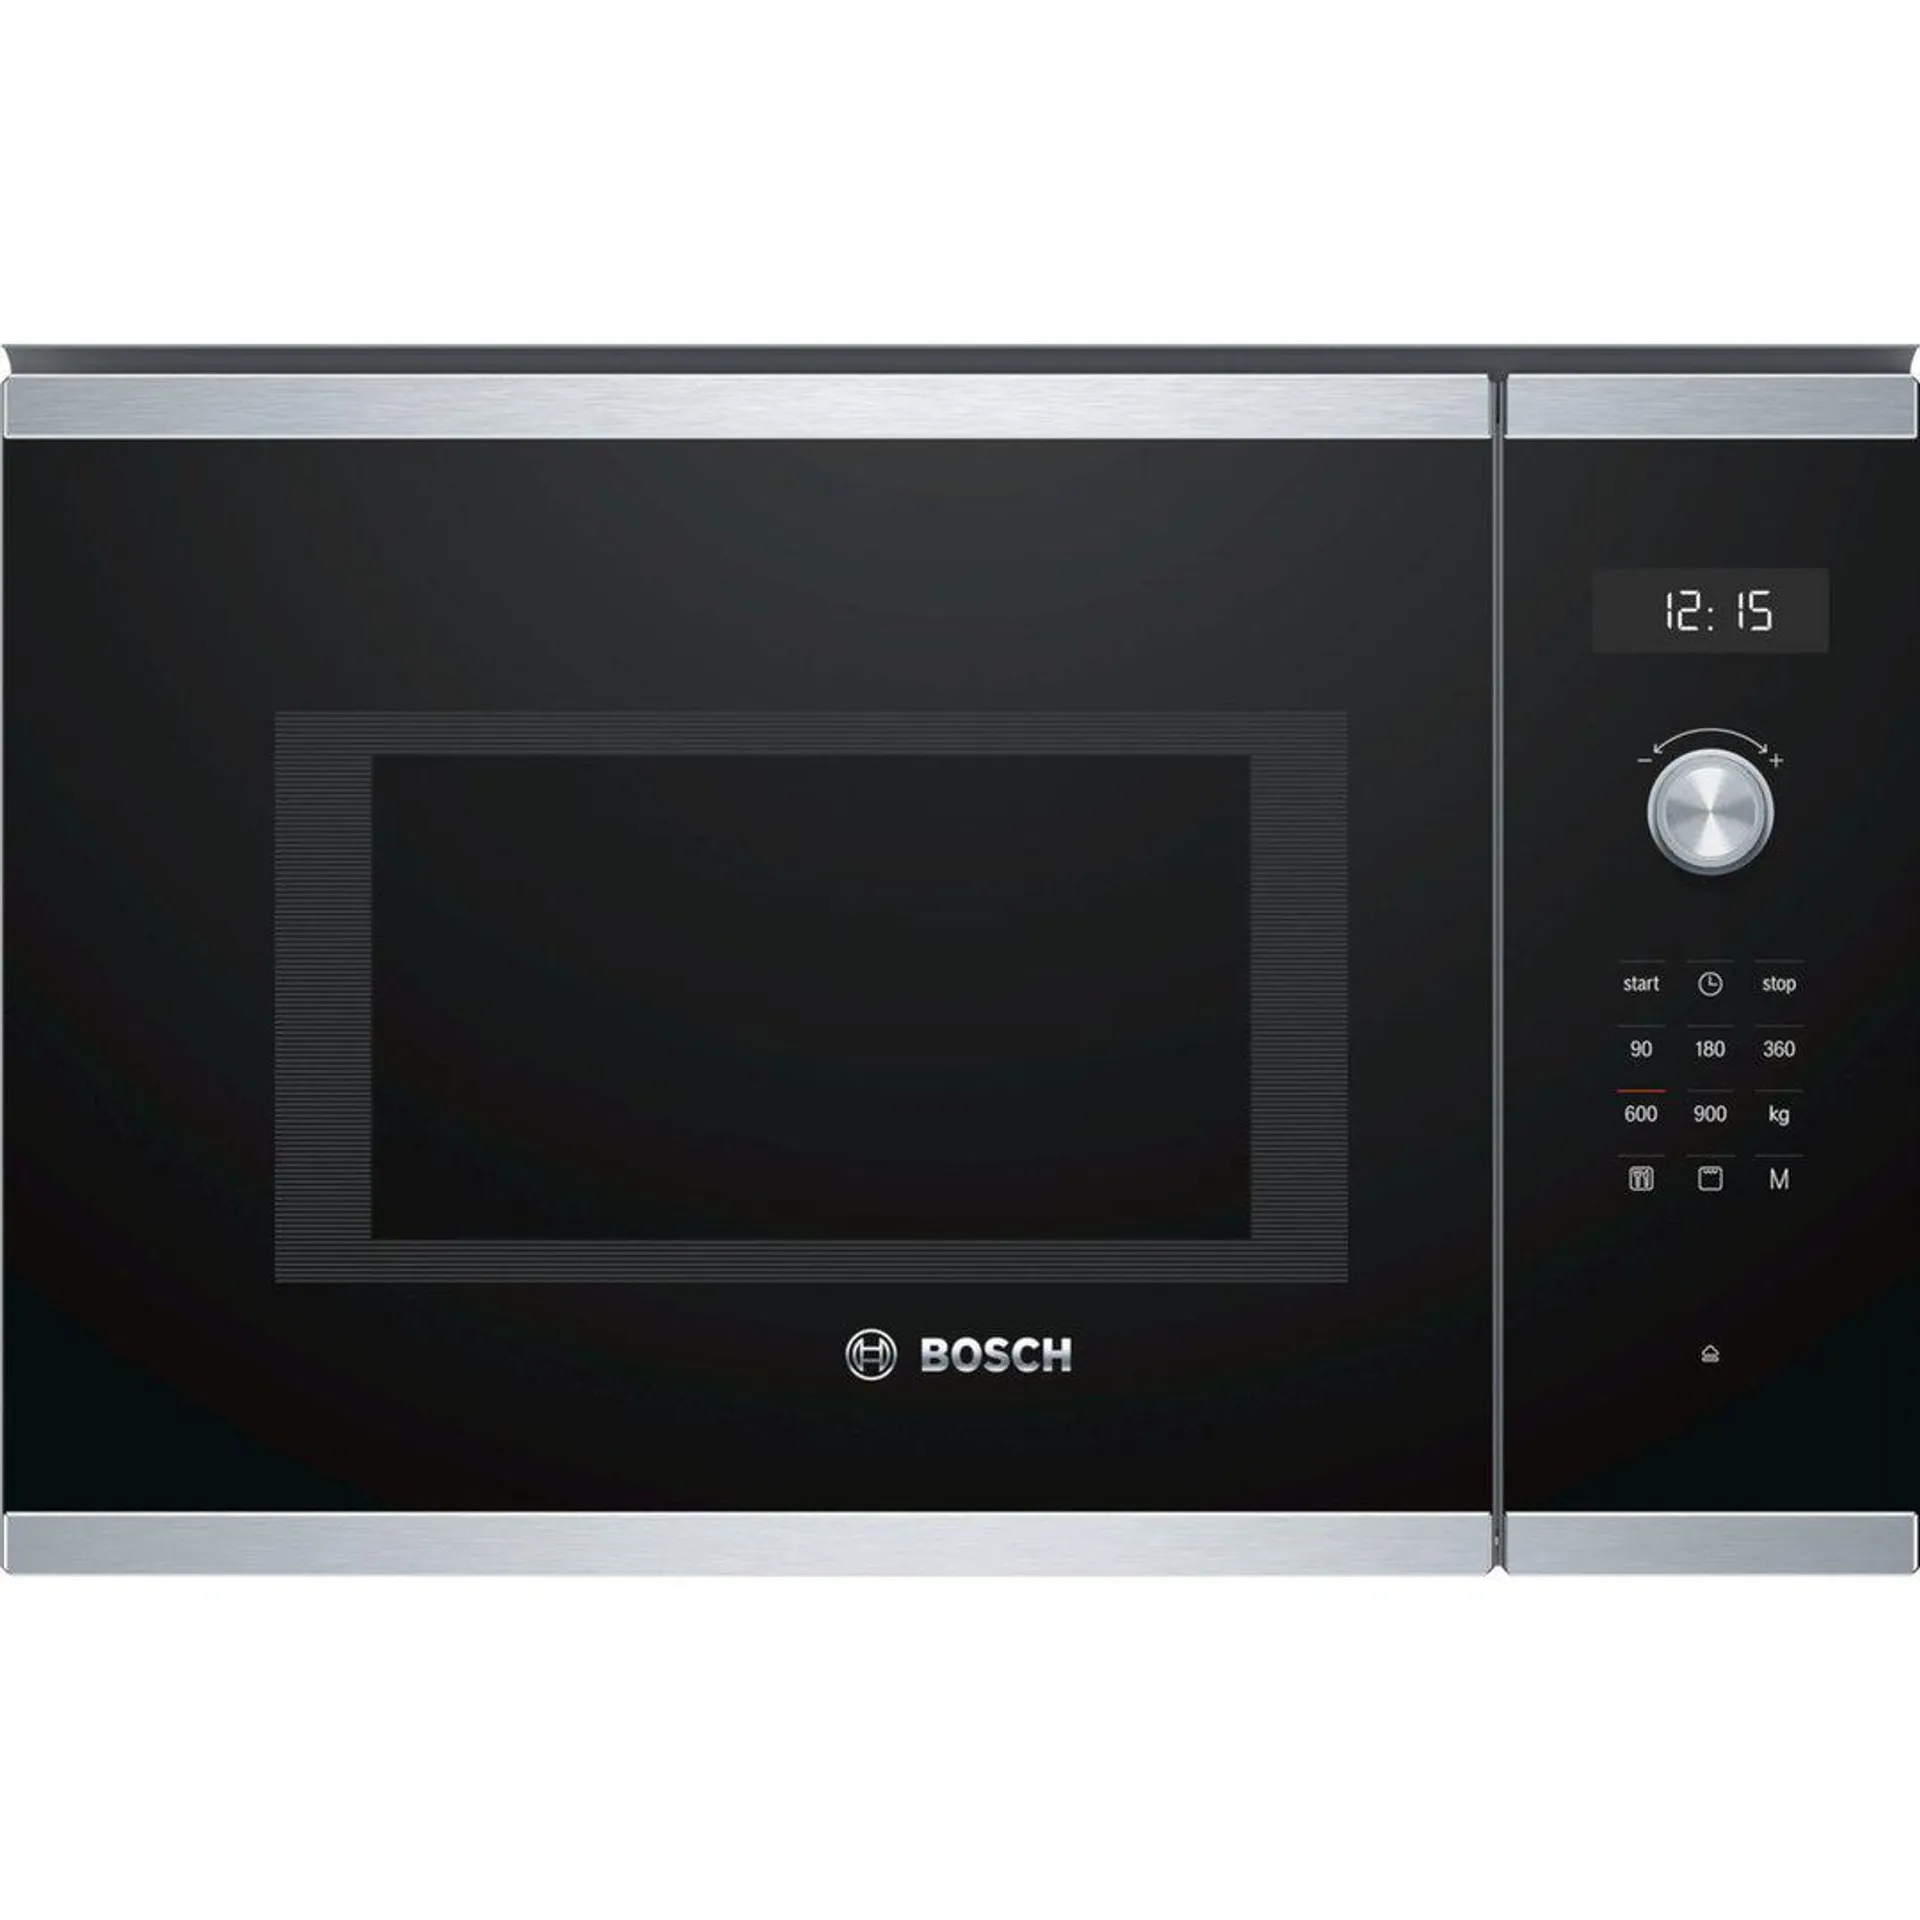 Bosch Serie 6 Built-in Microwave Oven BEL554MS0A